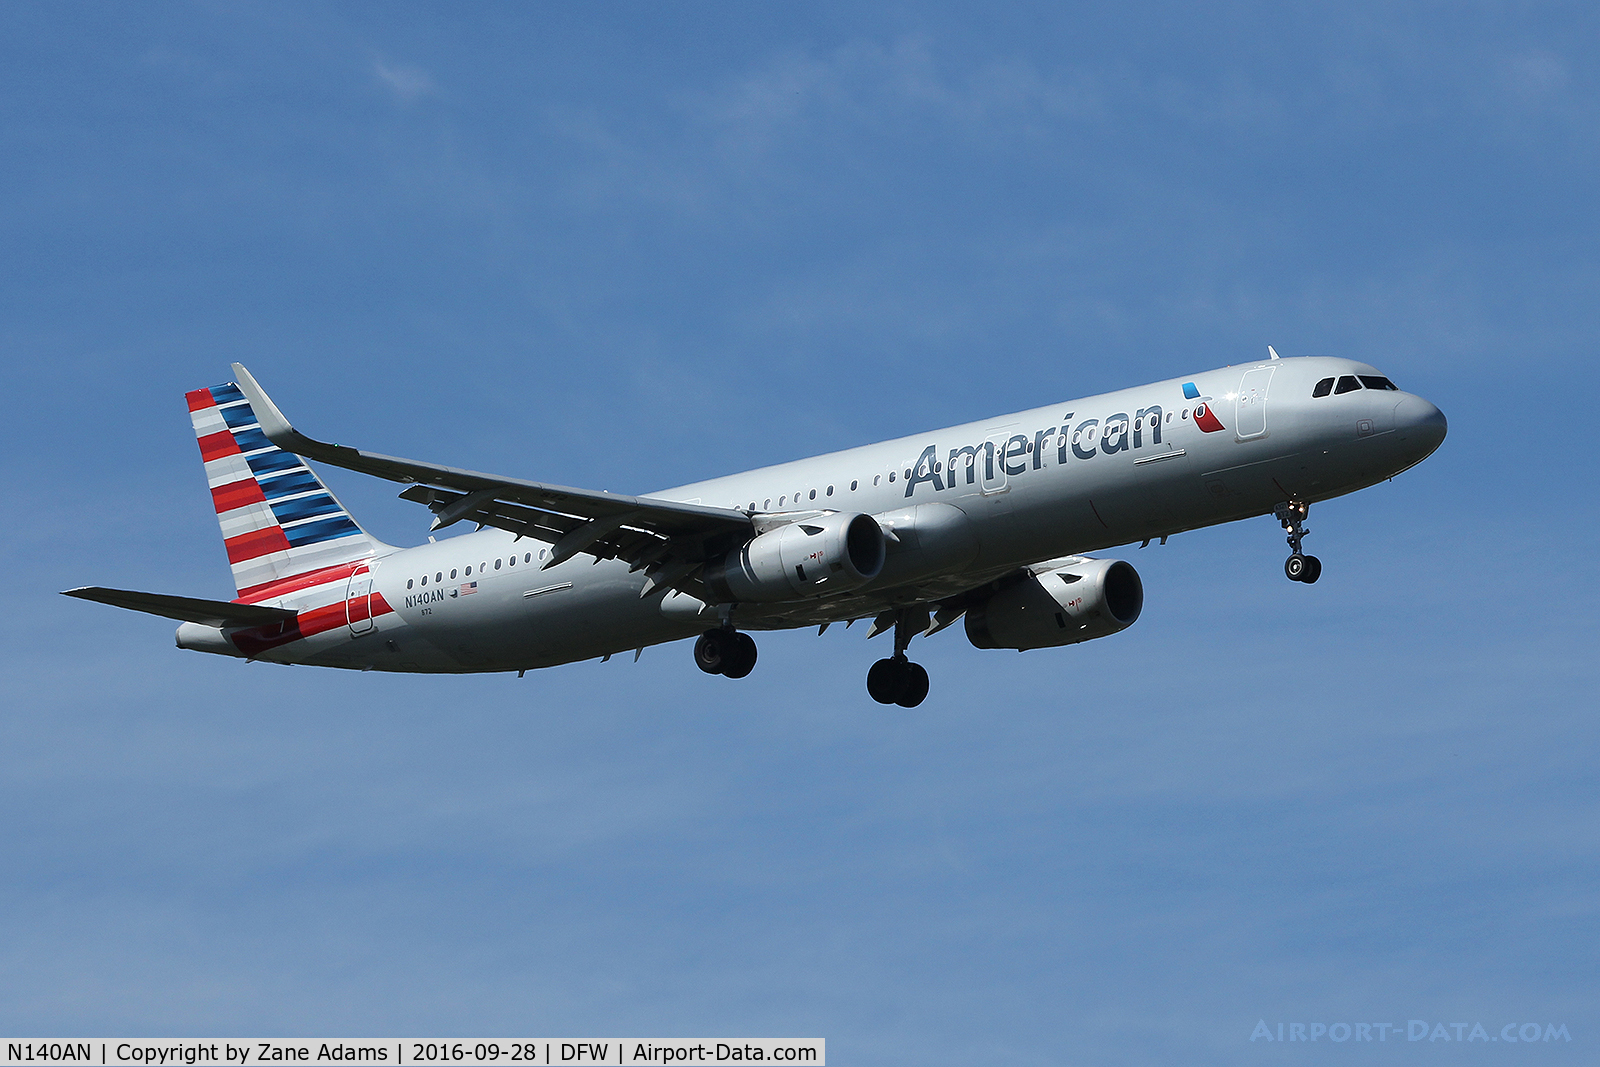 N140AN, 2015 Airbus A321-231 C/N 6667, Arriving at DFW Airport